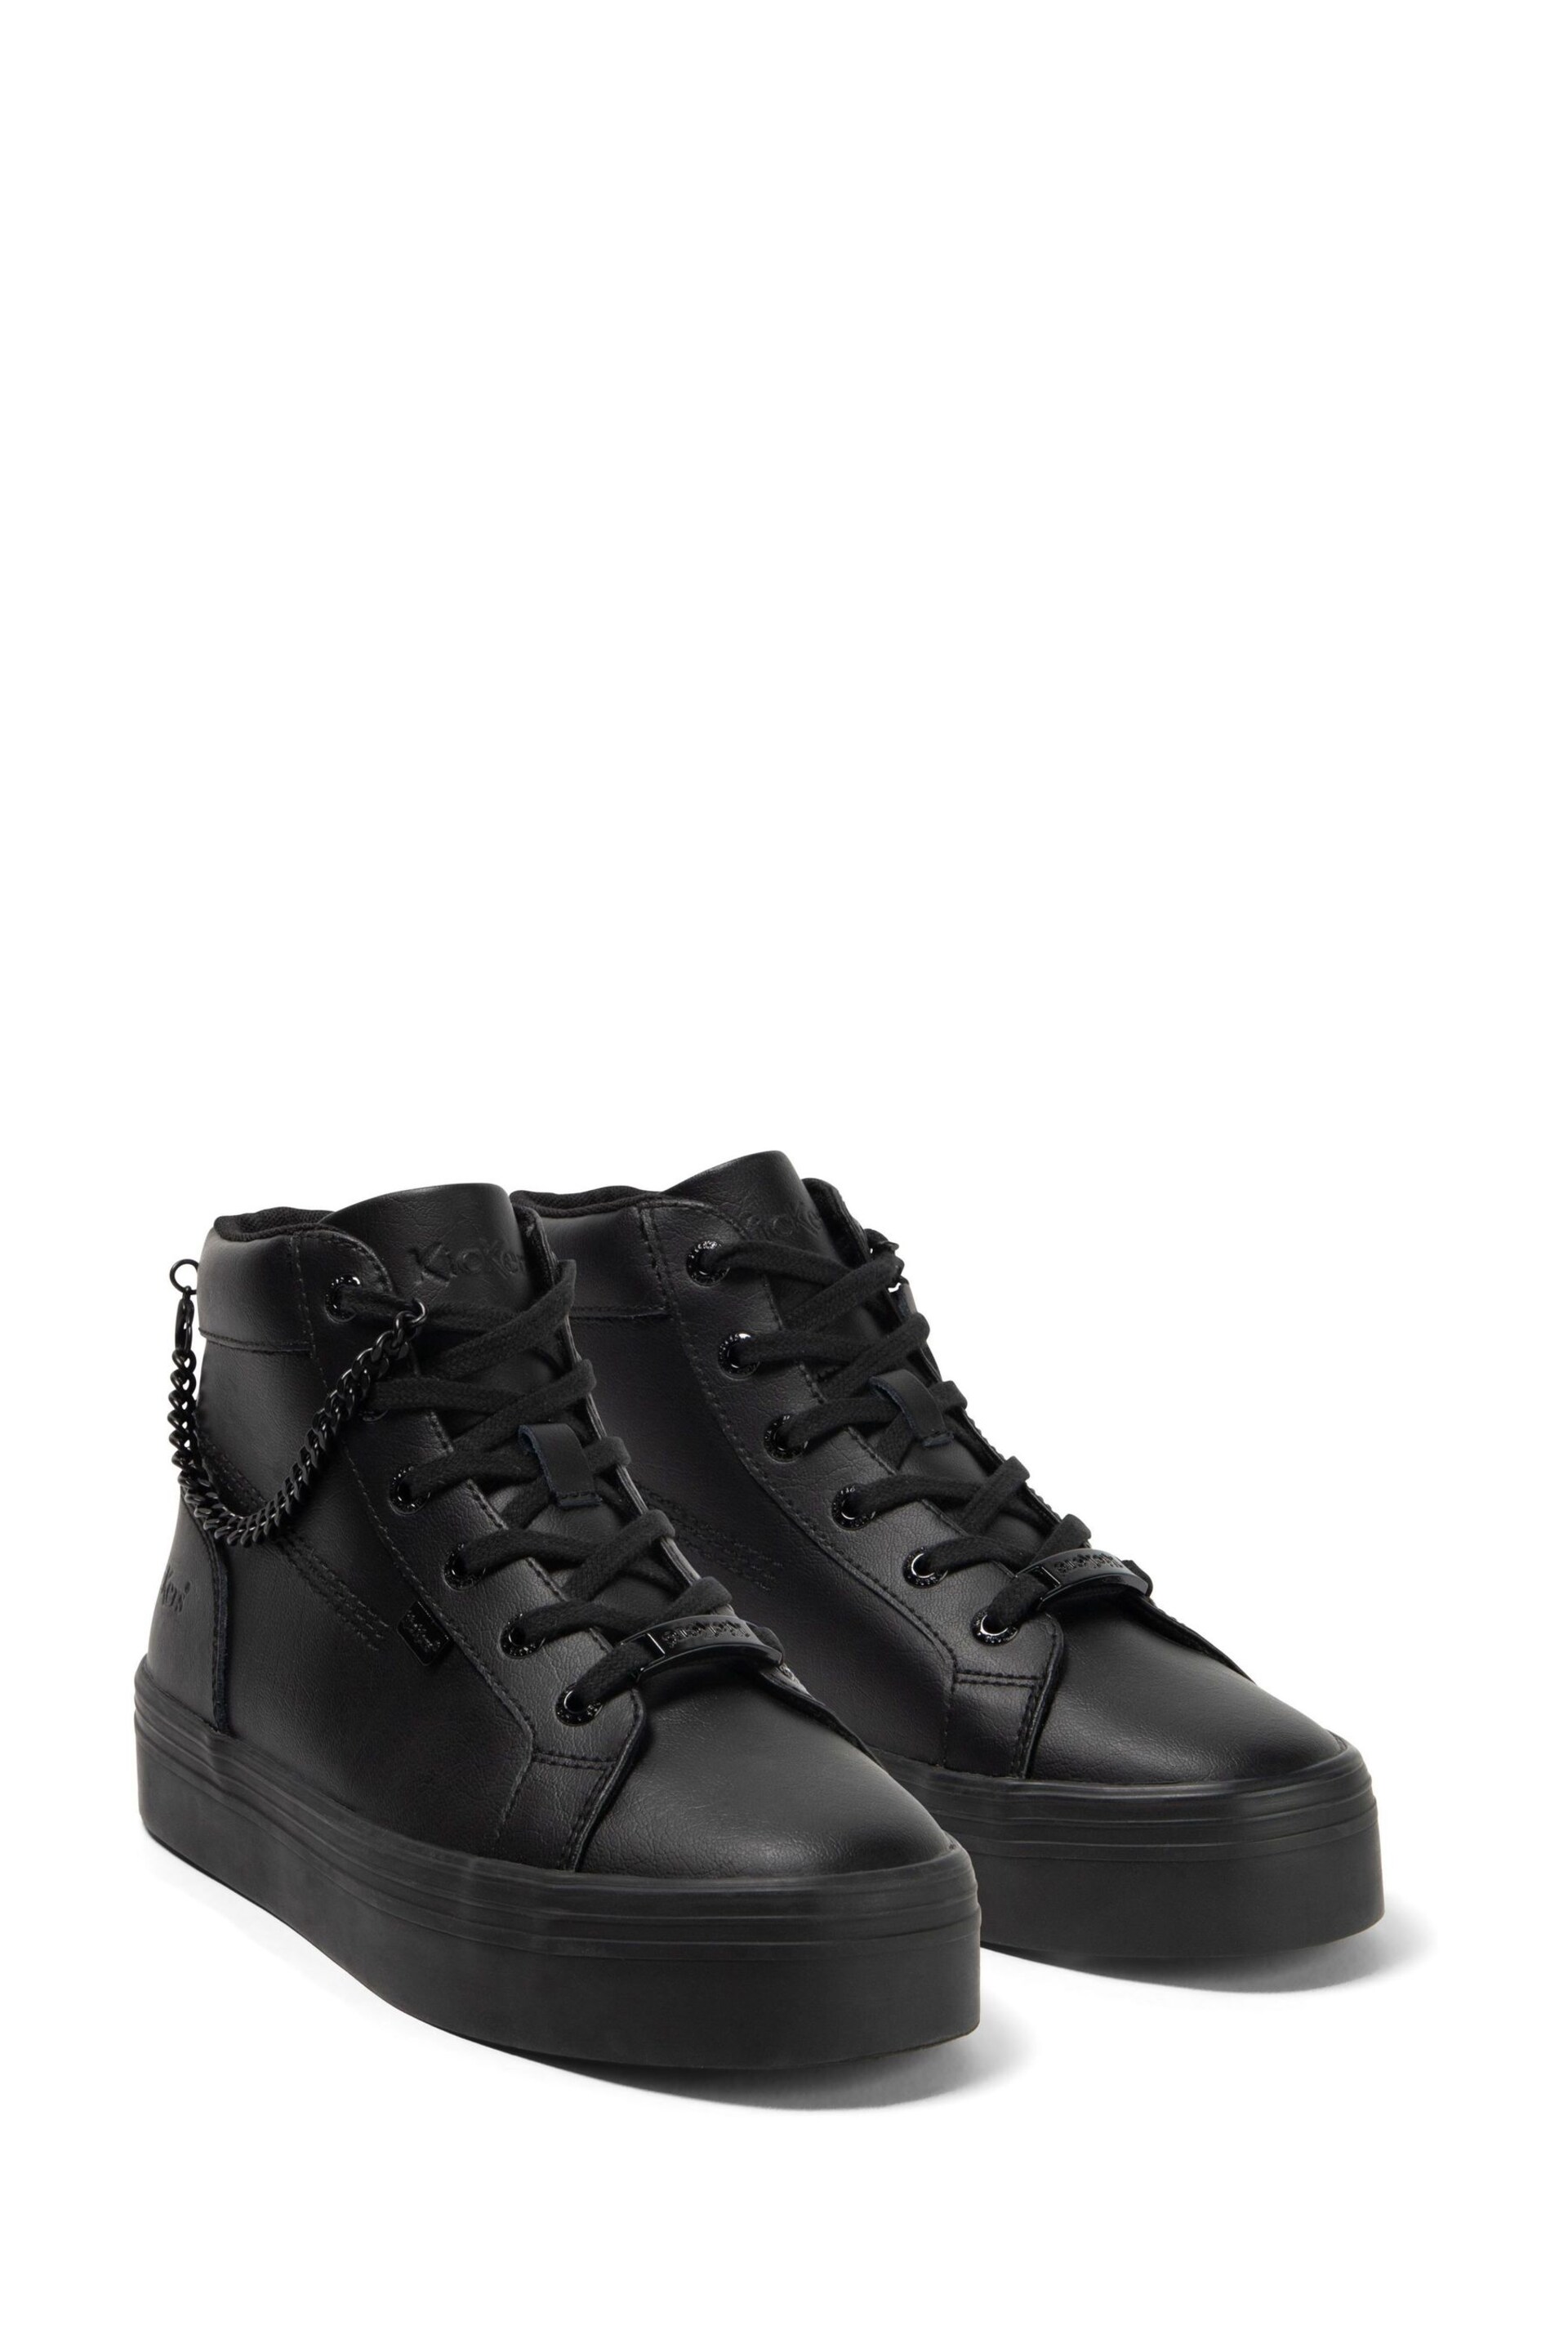 Kickers Black Youth Tovni Hi Stack Chain Leather Trainers - Image 3 of 6